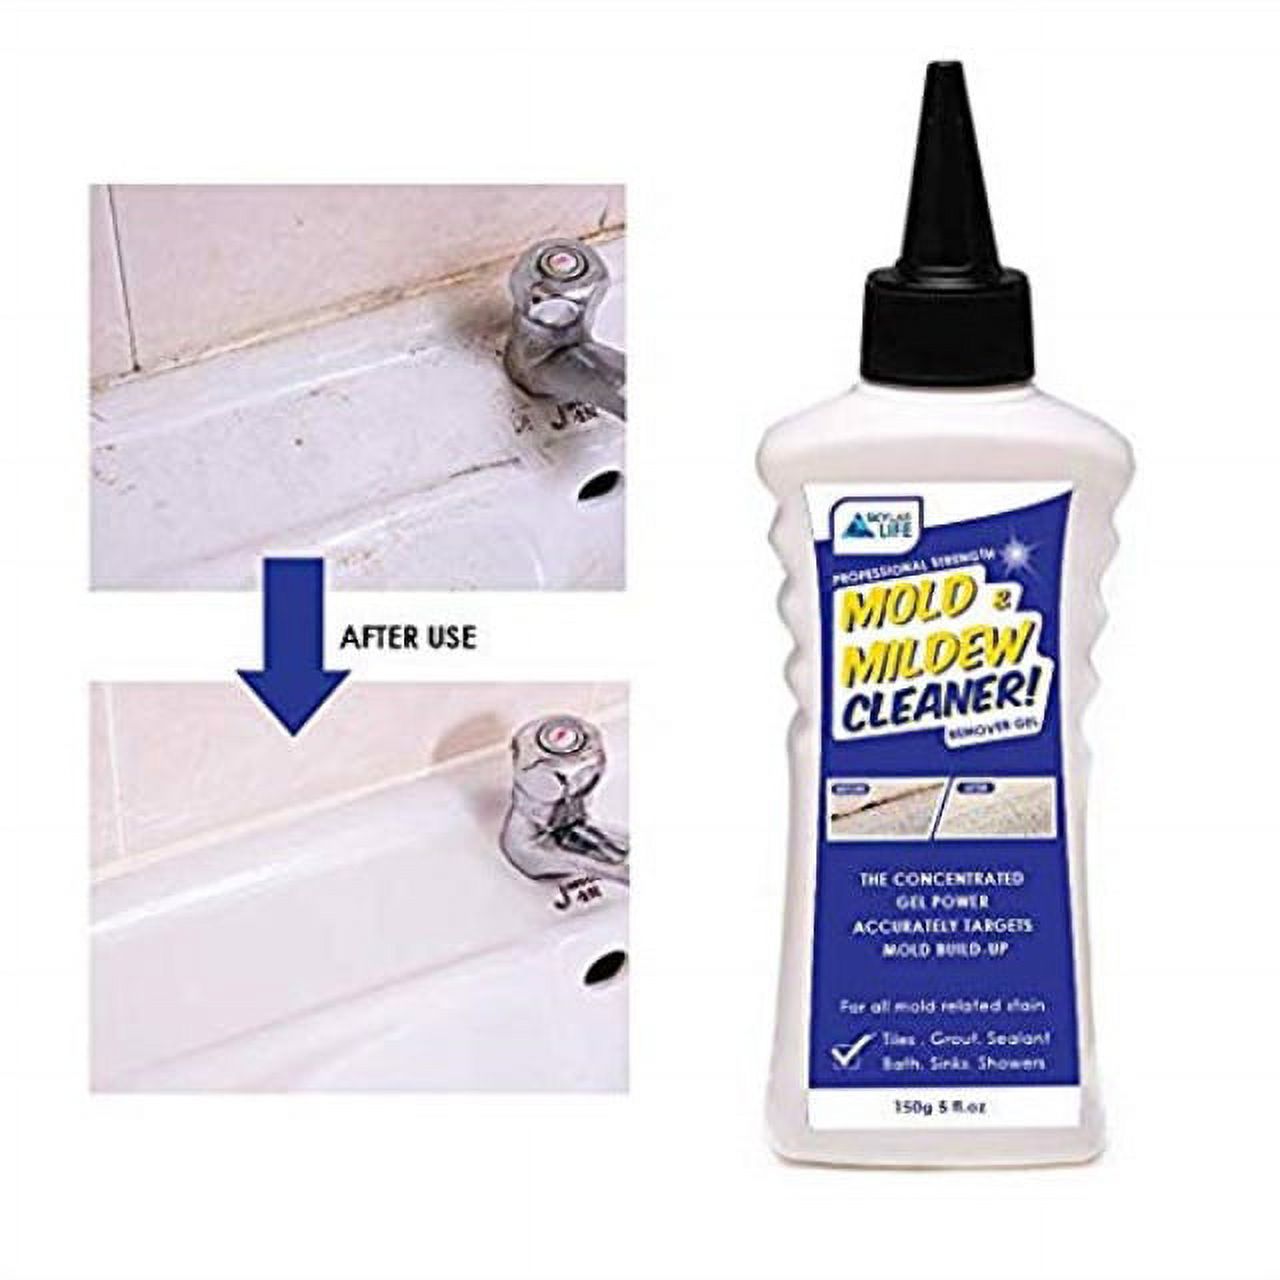 skylarlife home mold & mildew remover gel stain remover cleaner wall mold cleaner for tiles grout sealant bath sinks showers - image 1 of 6